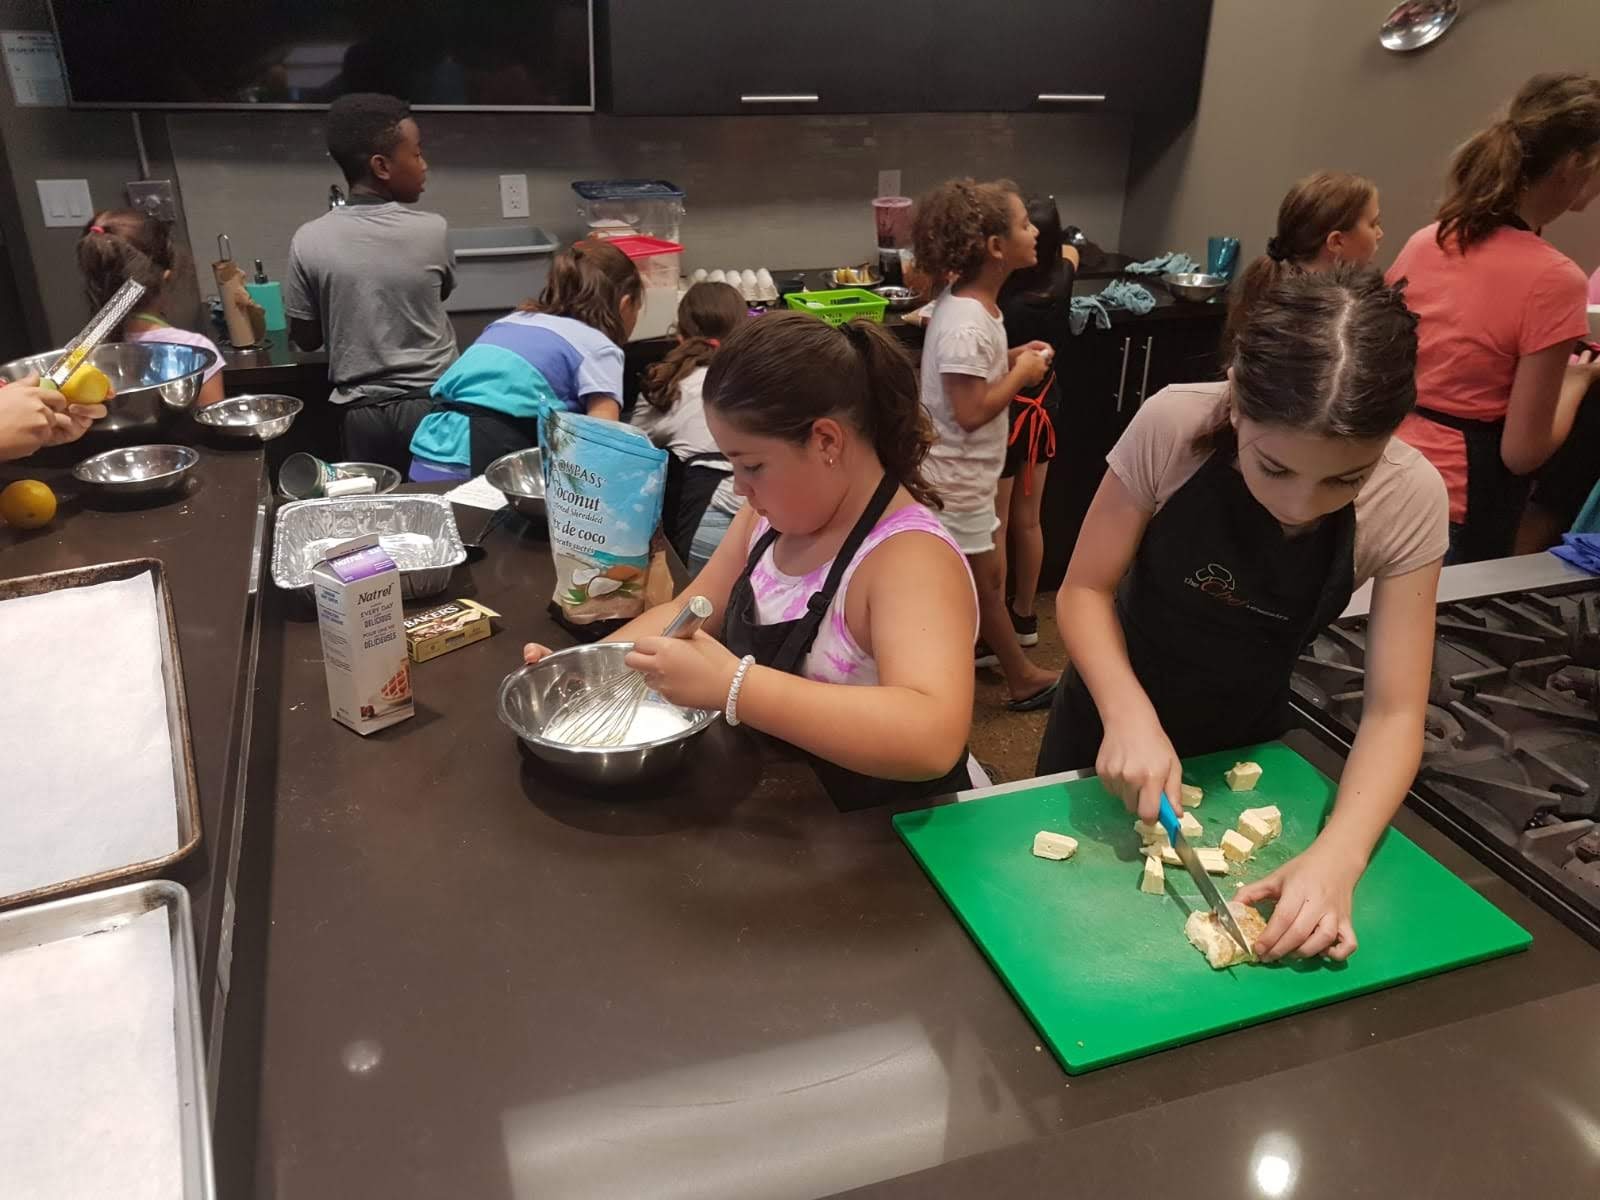 Vaughan - Teen Cooking Classes - 5-week Spring Session - Monday March 27 - May 1 2023